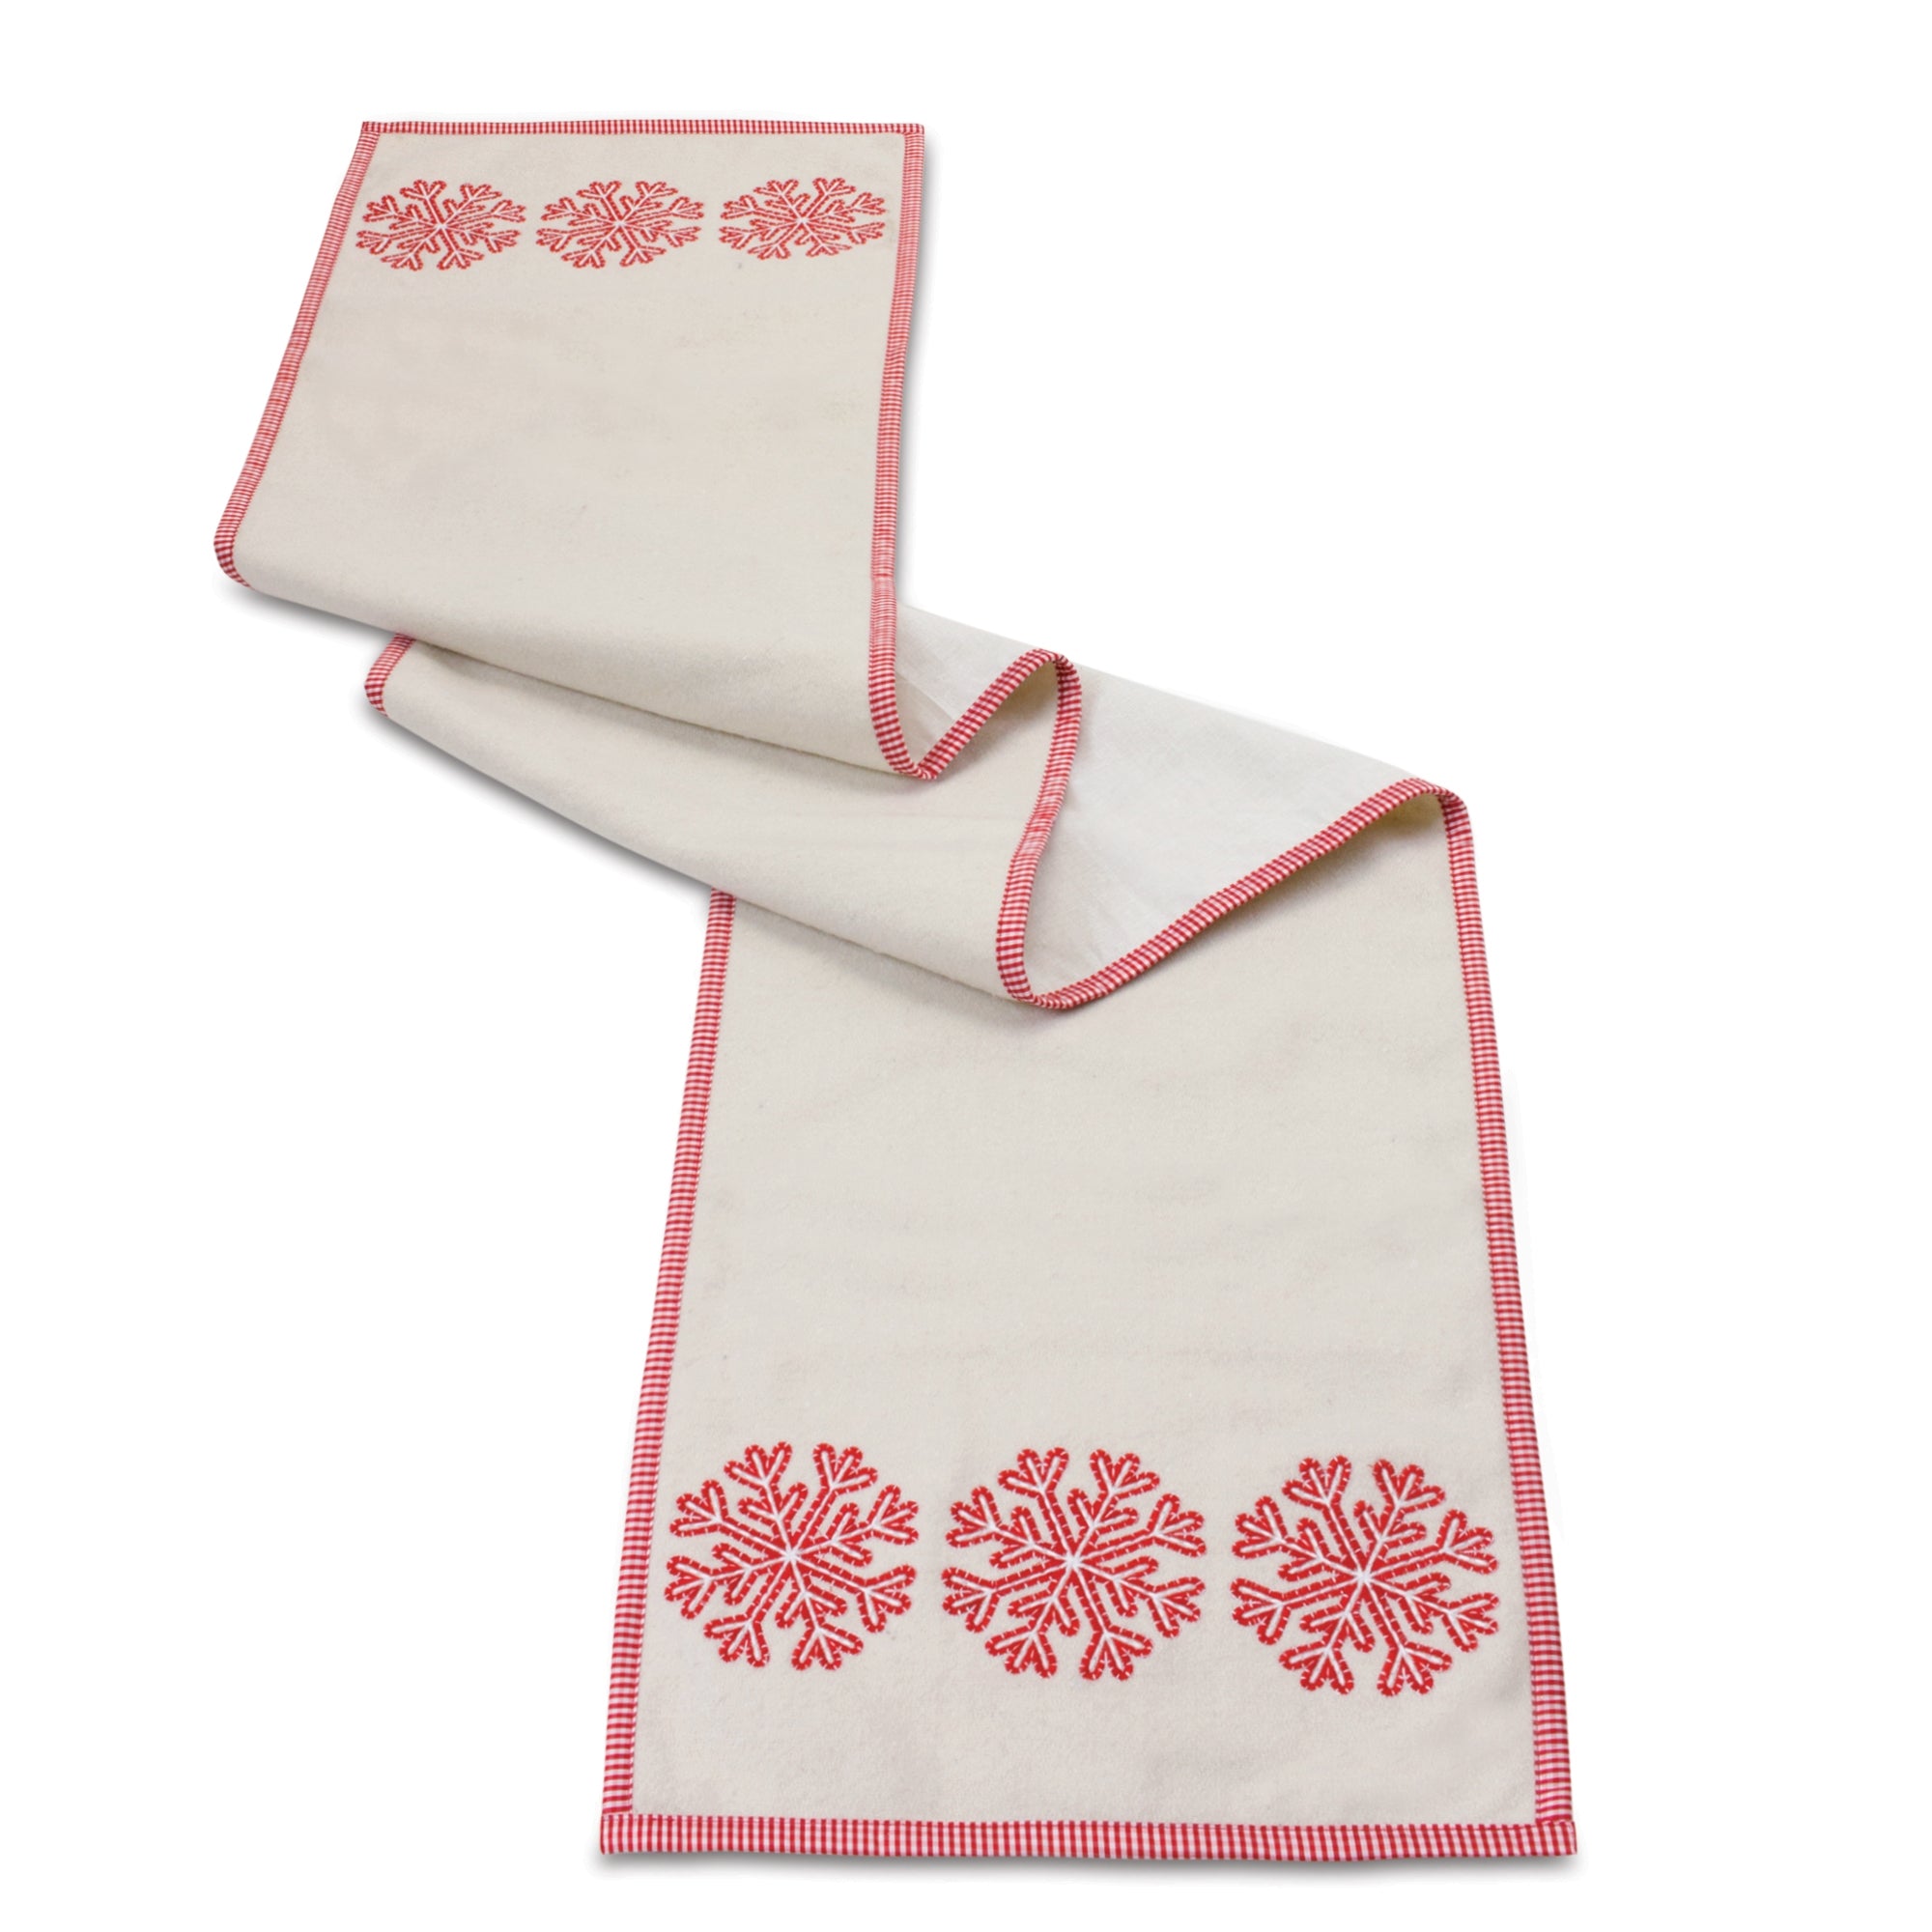 Embroidered Snowflake Table Runner 72"L